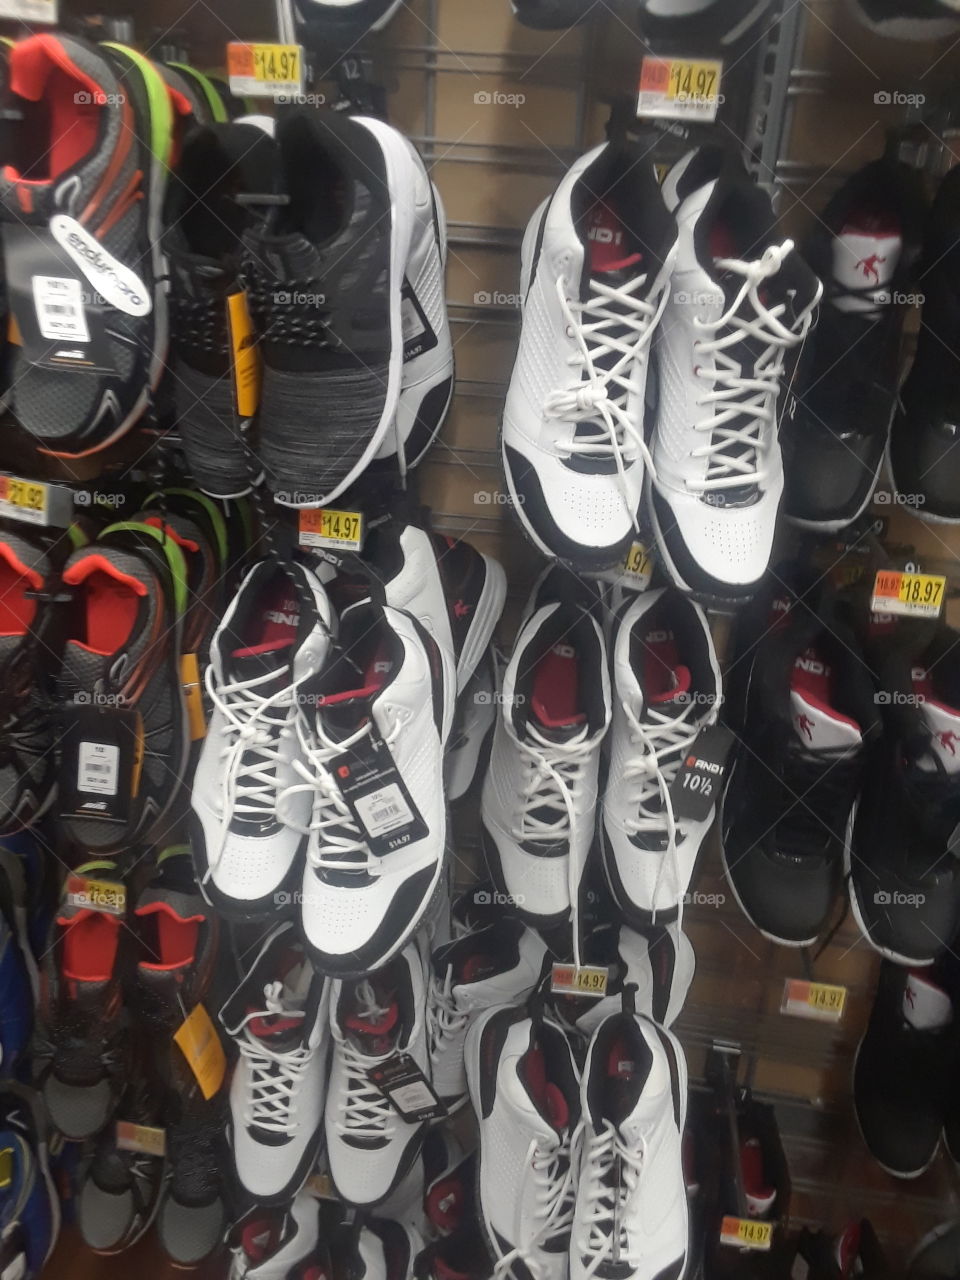 many shows here at Wal-Mart for basketball. some lady said no because she thought they didn't have any but she mad no idea.funny how she told me no but I still found basketball shoes here. terrific prices. I would never spend hella money on shoes.